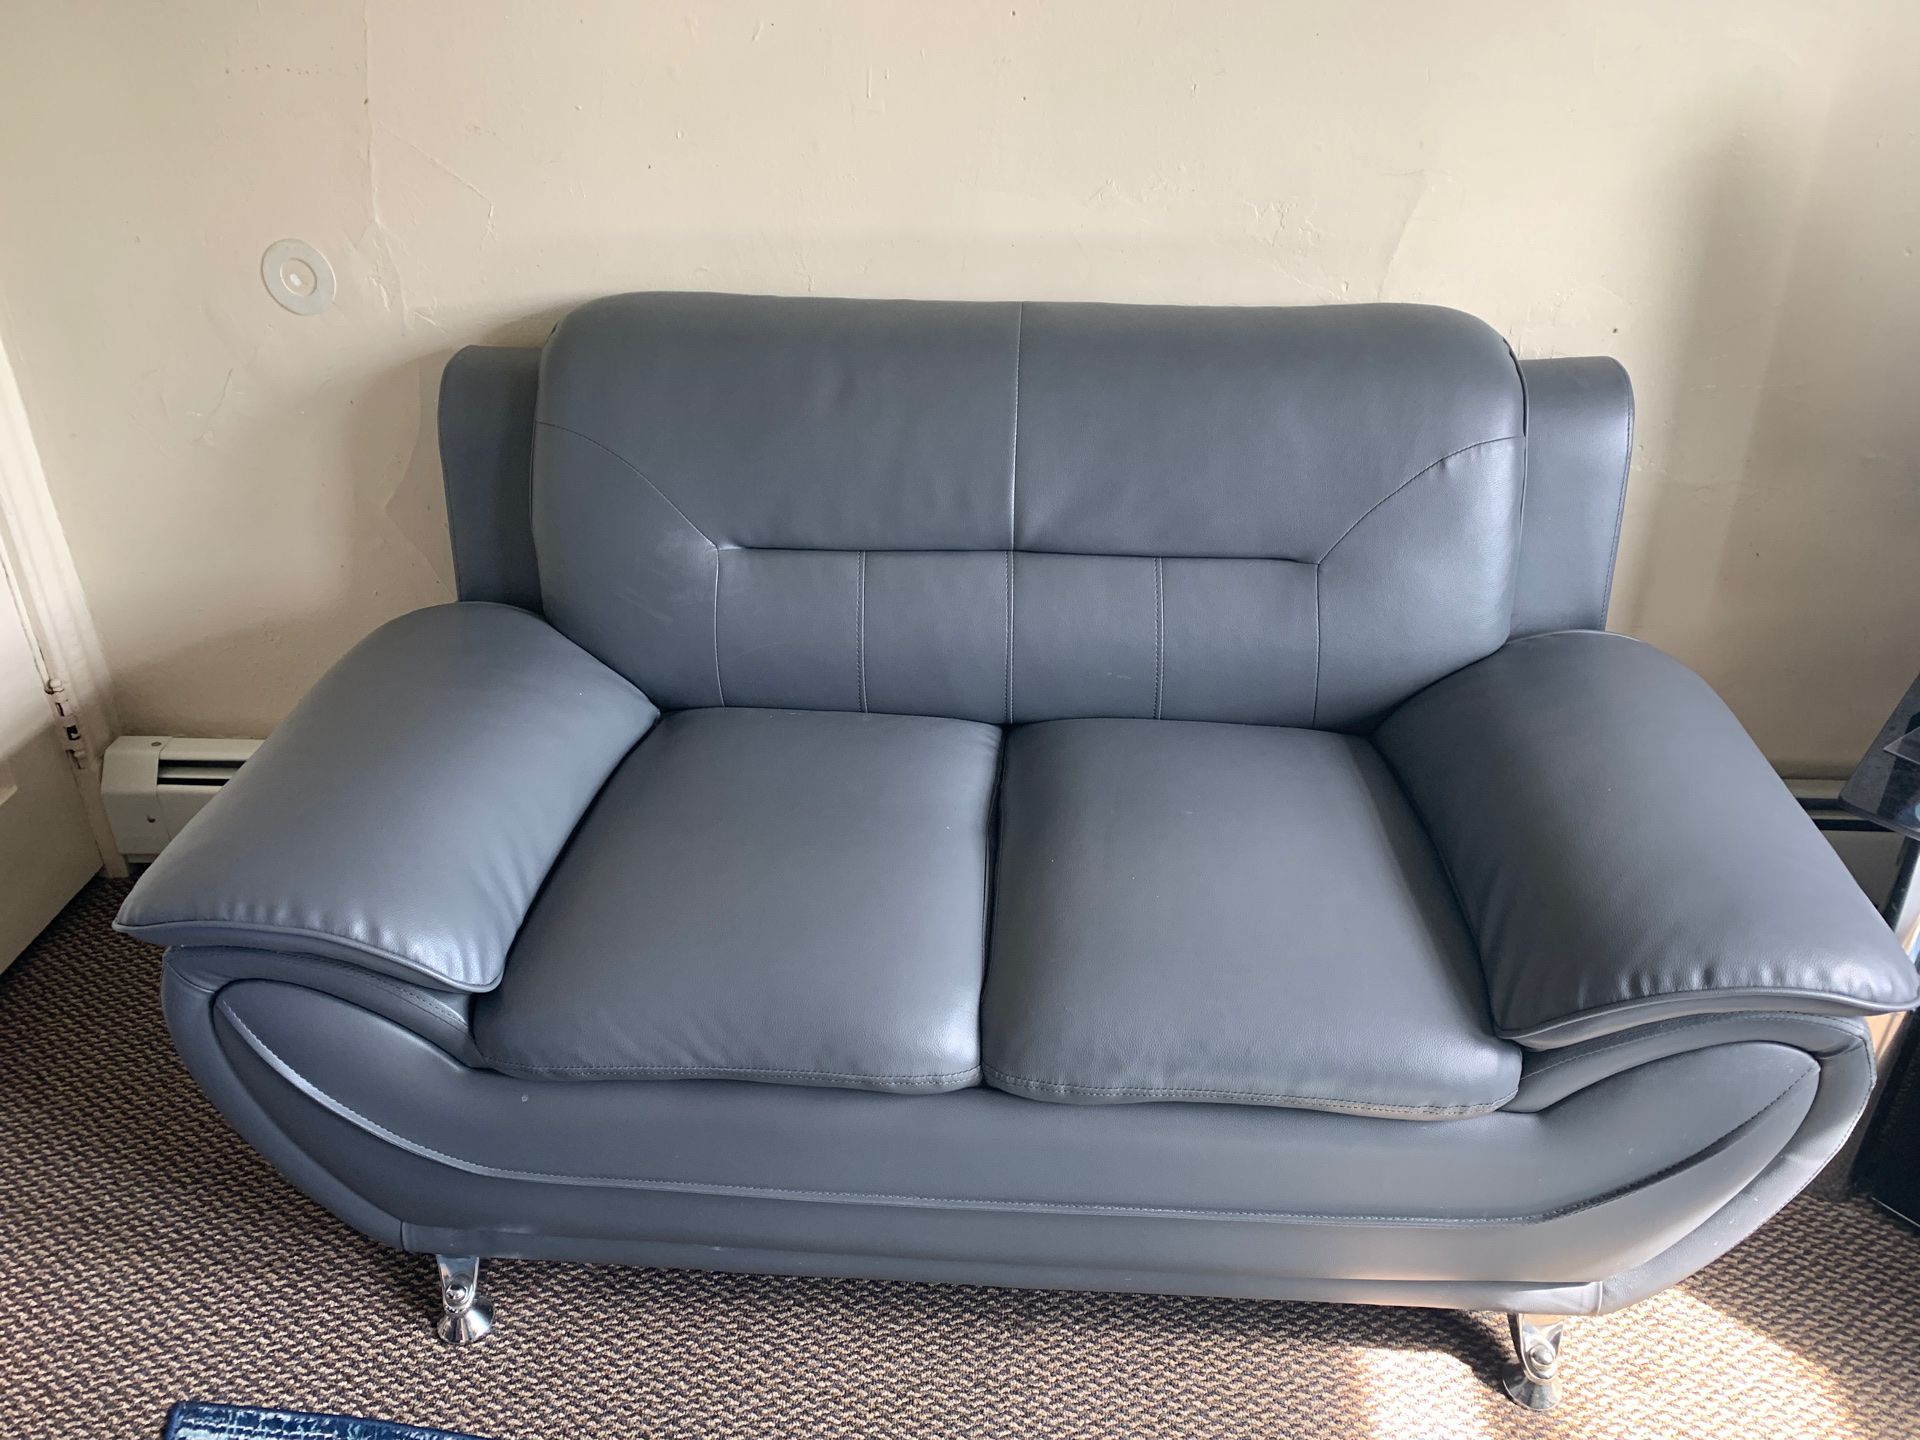 3 beautiful gray leather couches Use - like new just bought them about 4 months ago , reason I’m selling them for moving !